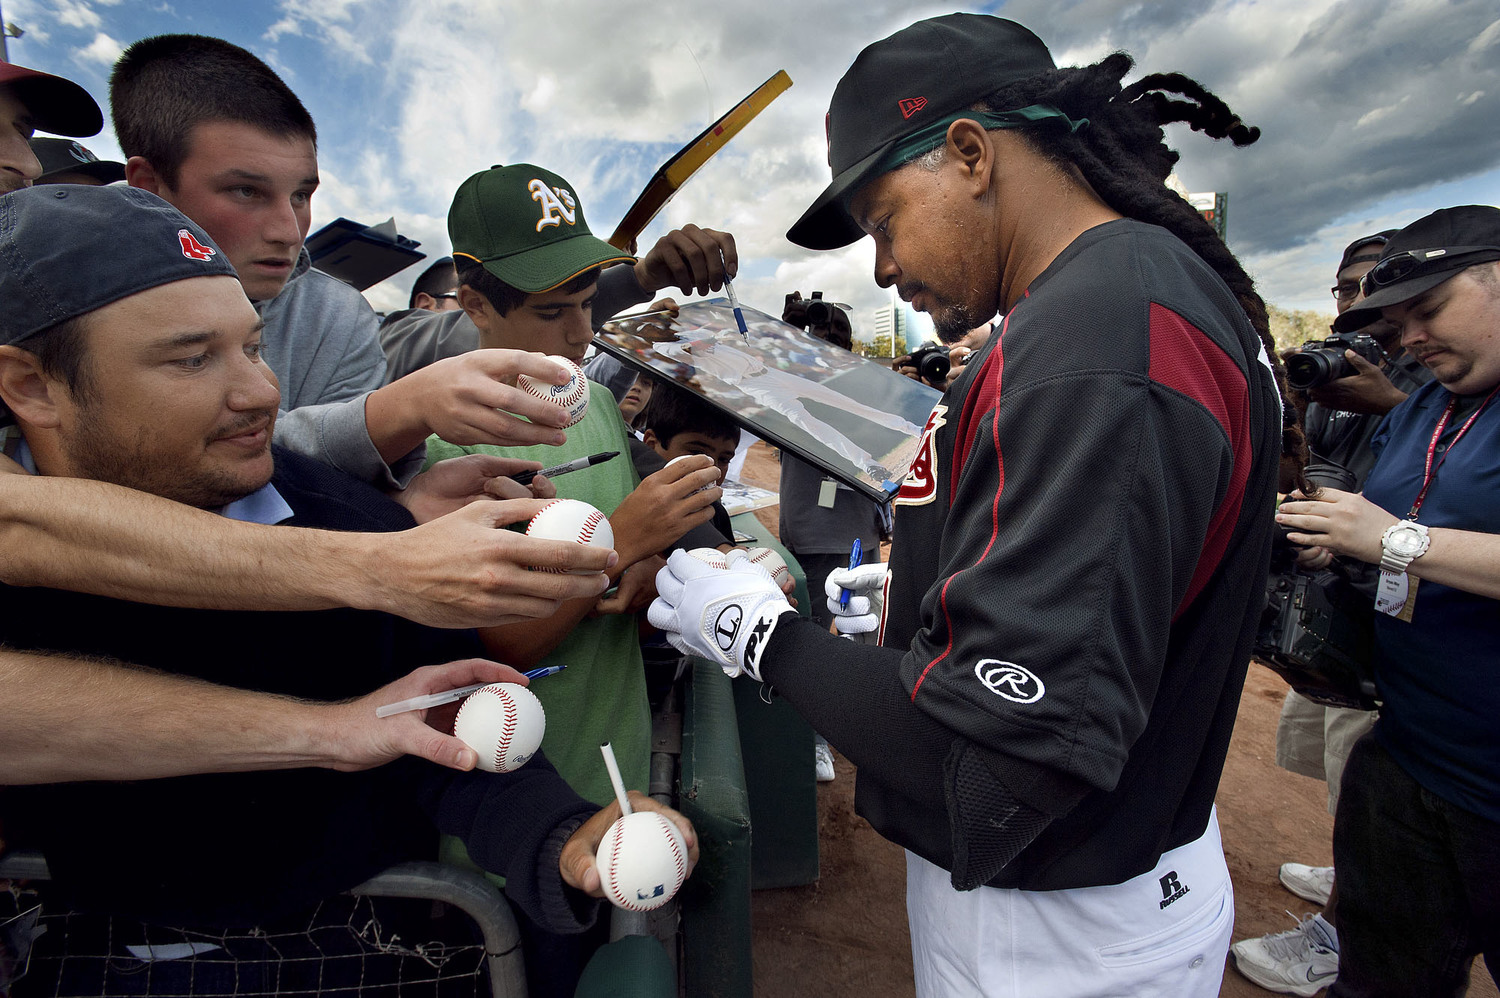  The River Cats' left fielder Manny Ramirez (11) signs autographs briefly&nbsp; prior to the game between the Sacramento River Cats and the Reno Aces at Raley Field in West Sacramento on Friday, May 25, 2012. 